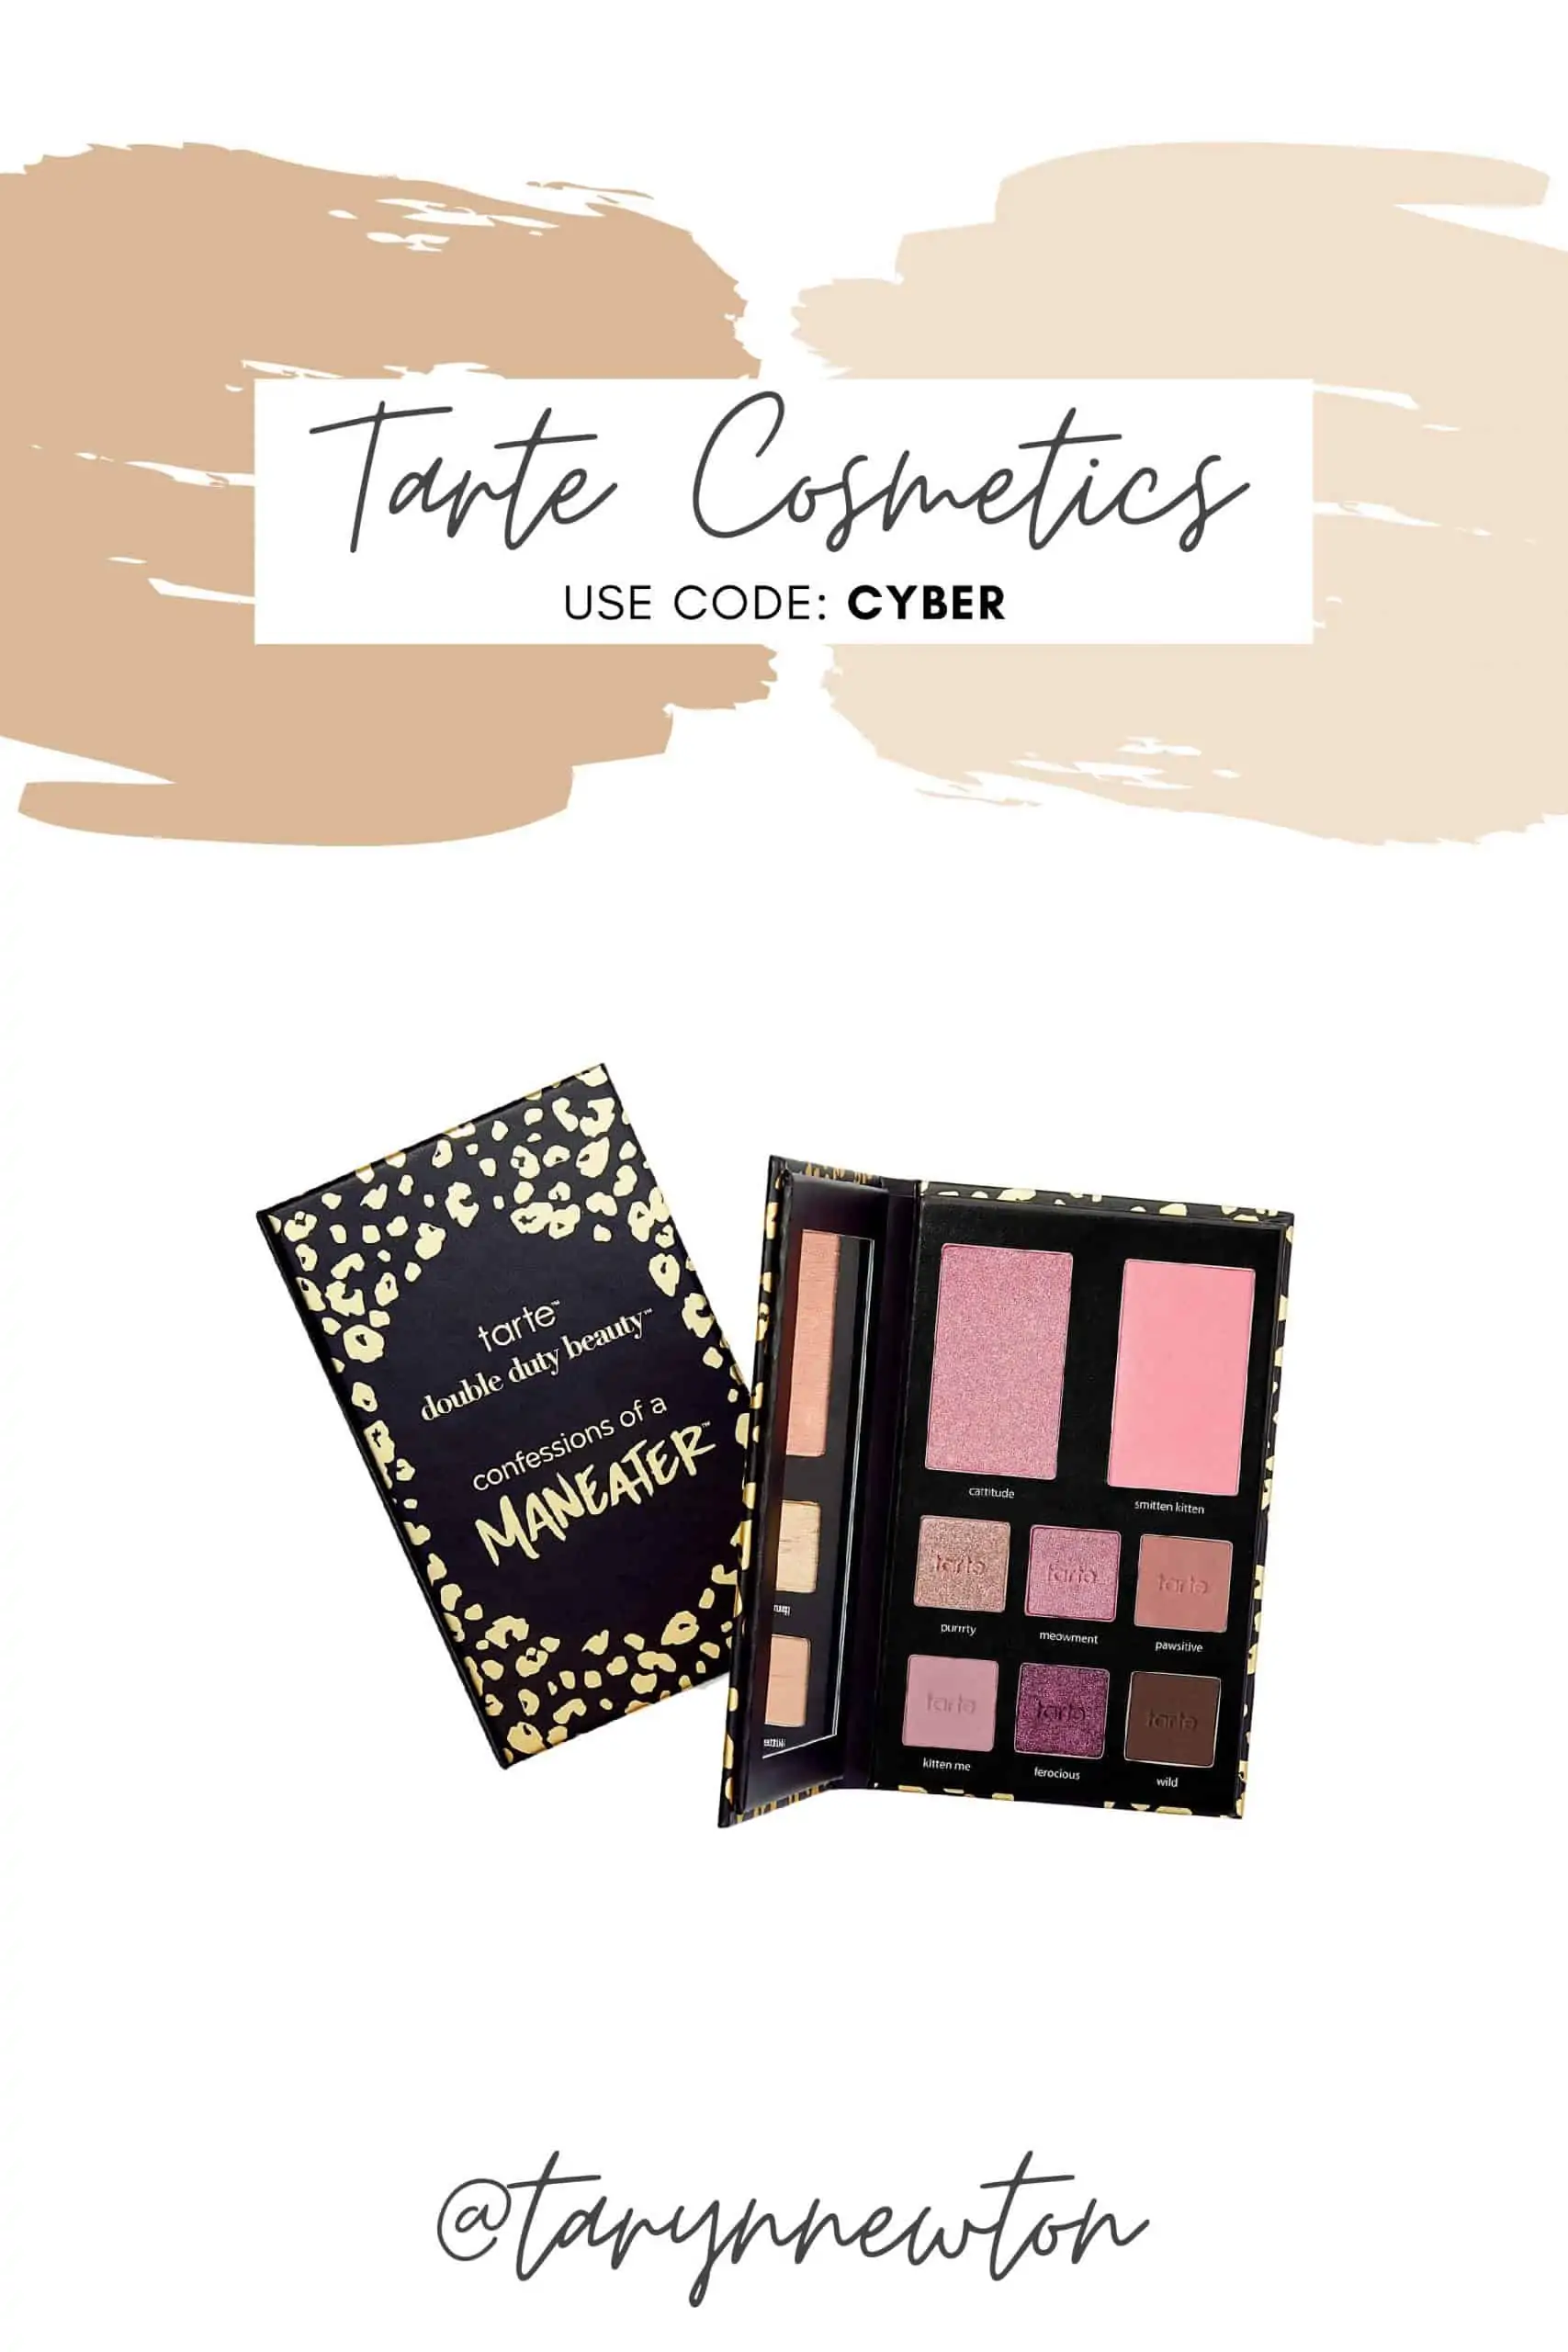 Black Friday Guide by popular Dallas life and style blog, Glamorous Versatility: Pinterest image of Tarte Cosmetics.